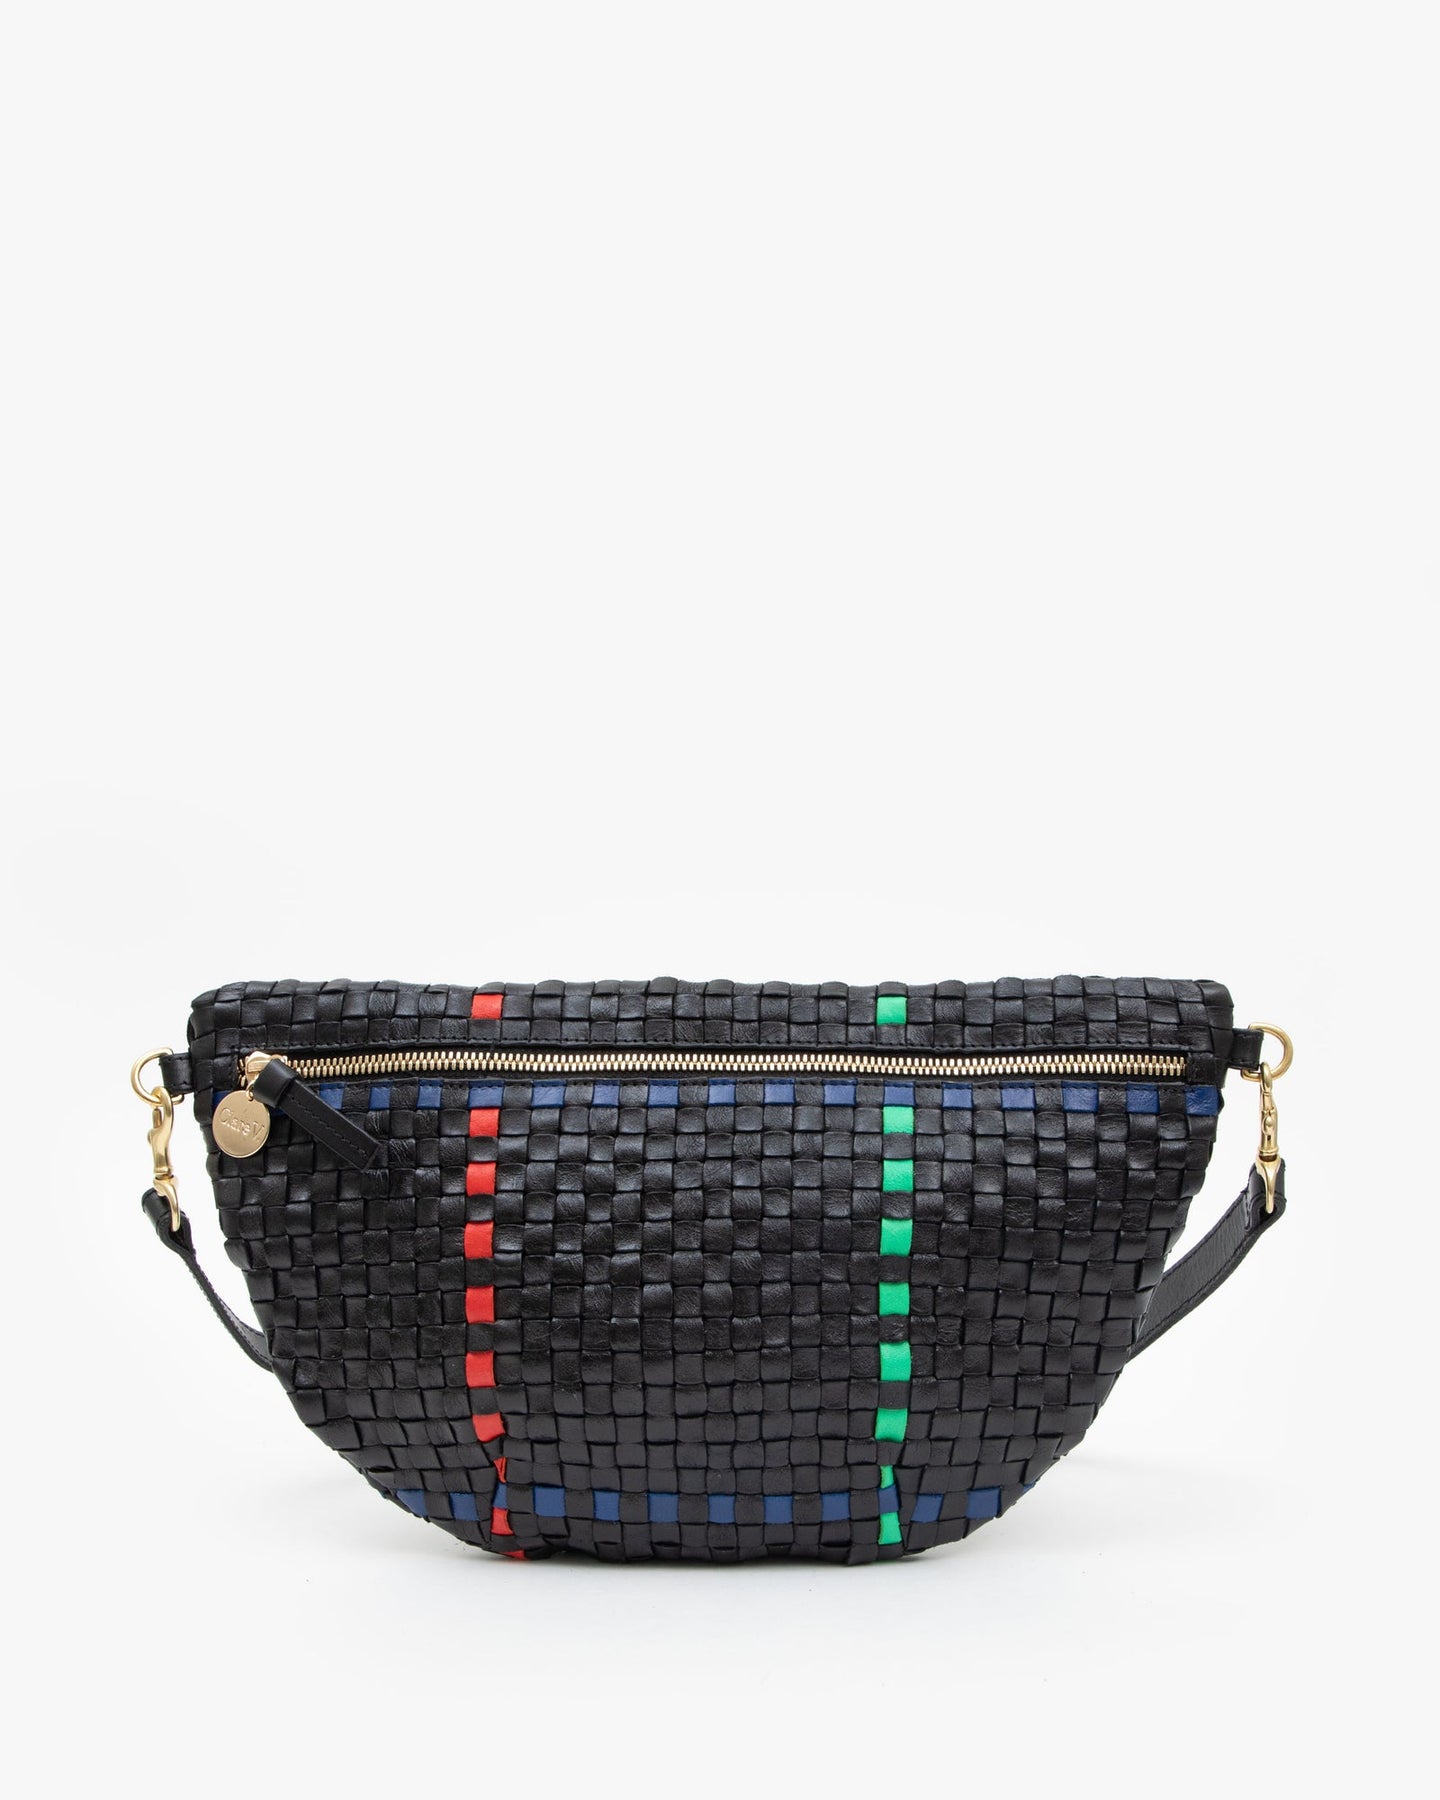 Clare V, Bags, Clare V Fanny Pack Parrot Green Lizard